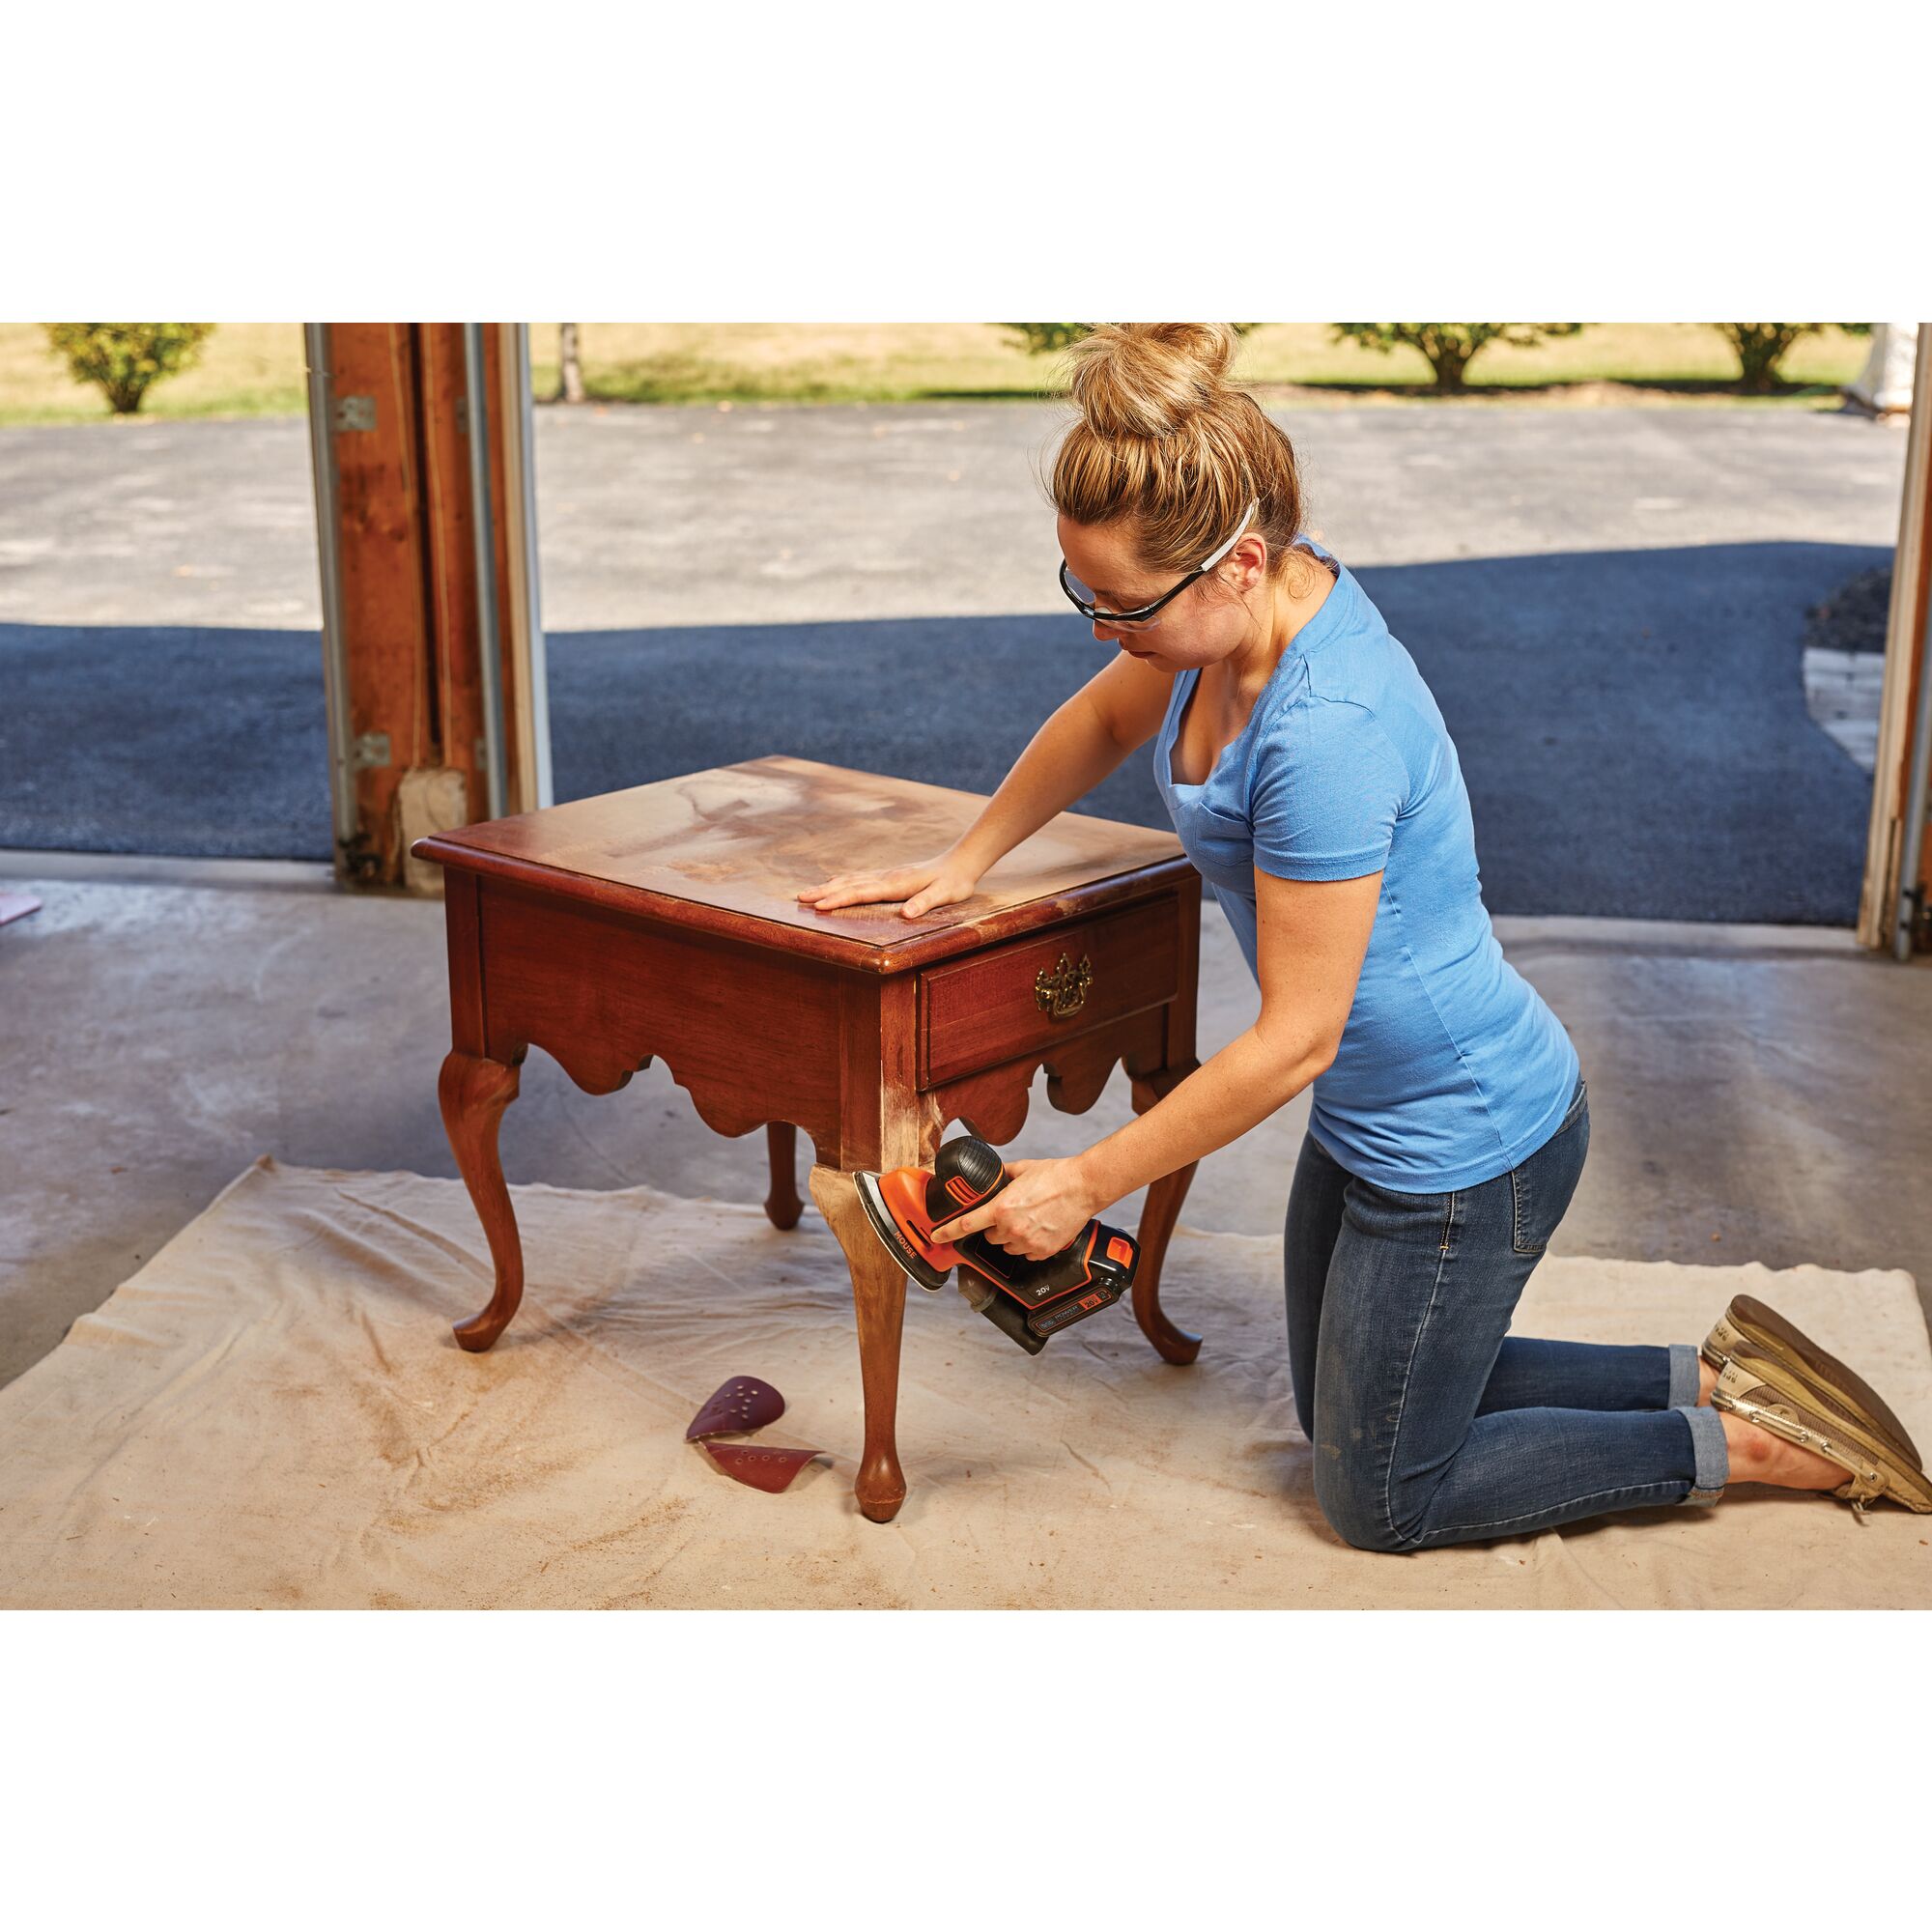 20 volt max cordless mous sander being used by a person to remove finish from a wooden side table